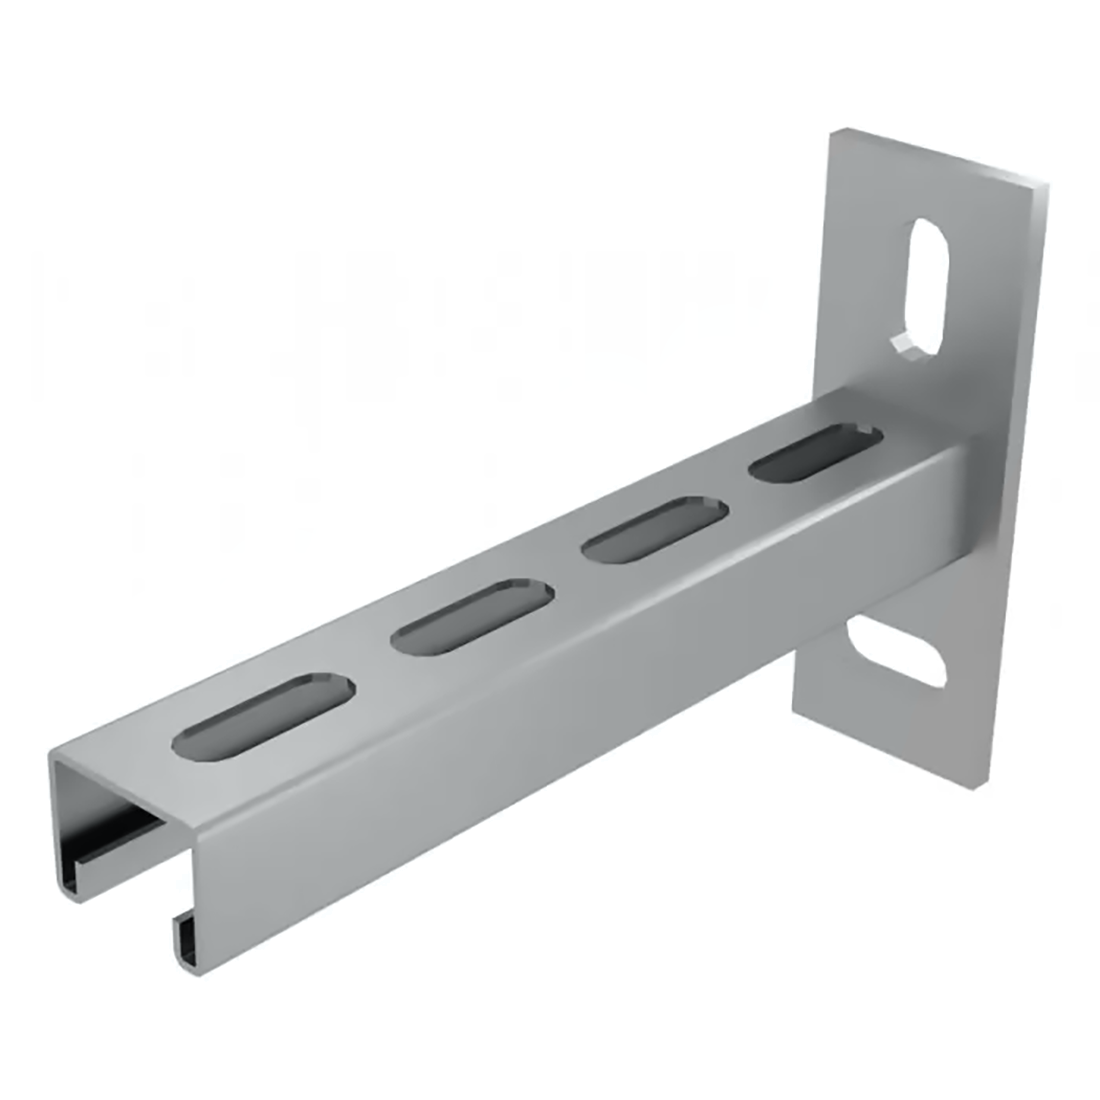 Benefits and Features of Earthquake Resistant Heavy Duty Wall Mounts